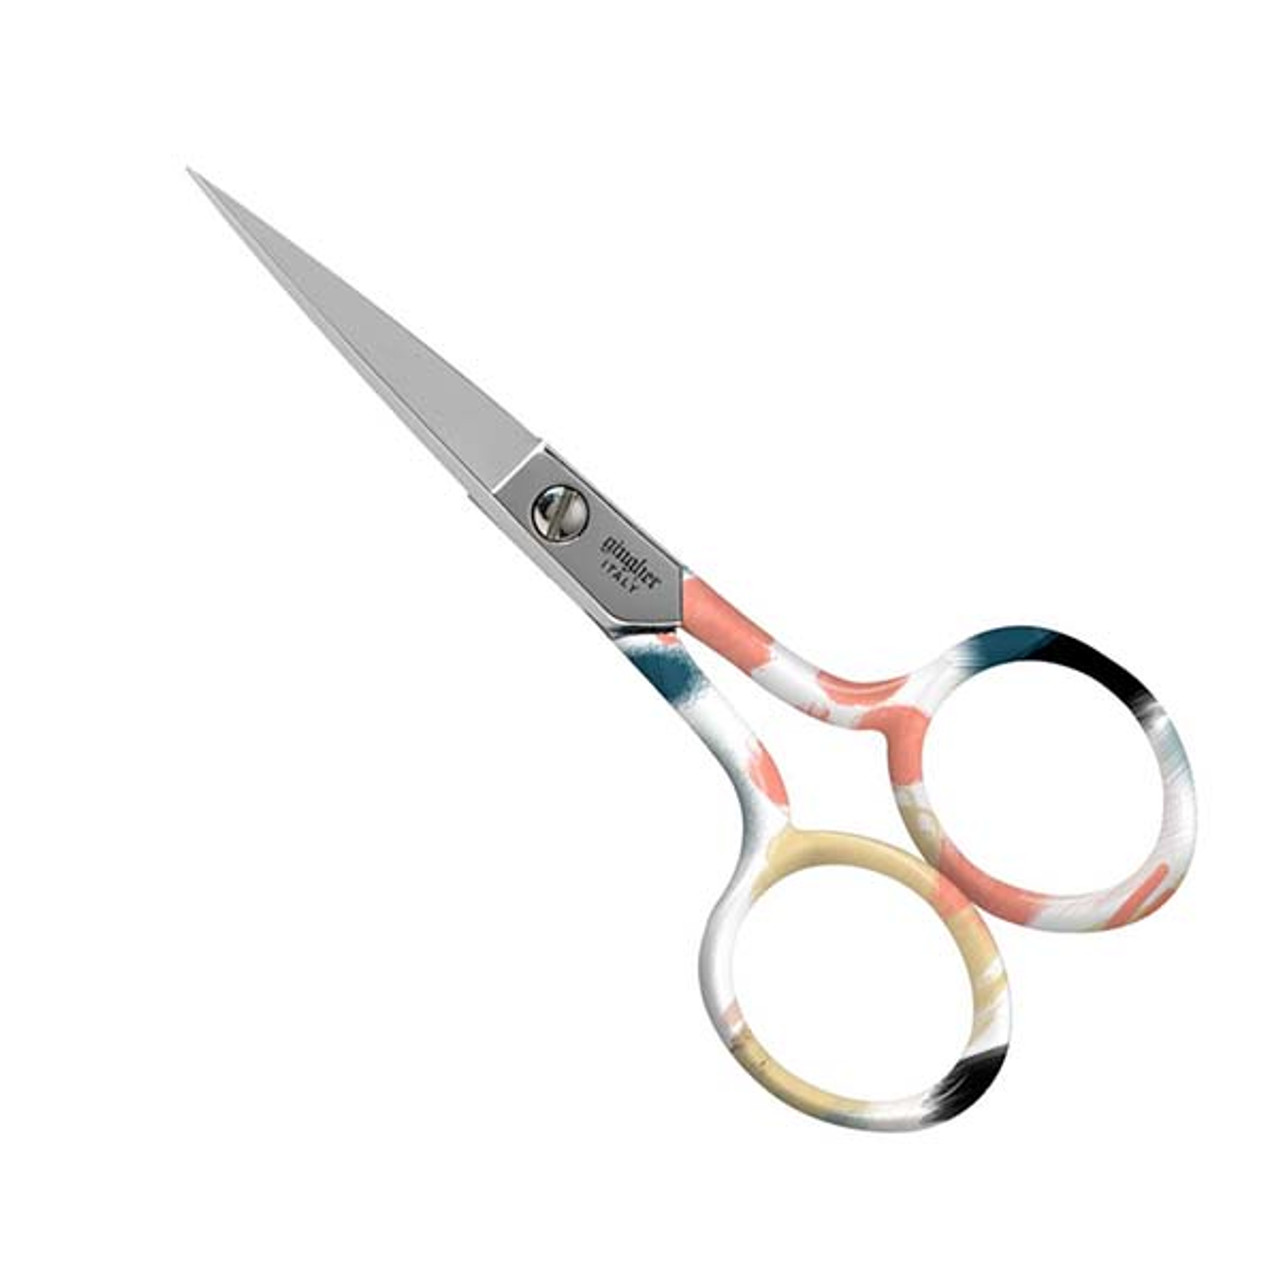 Scissors - Gingher 4 Curved Embroidery Scissors